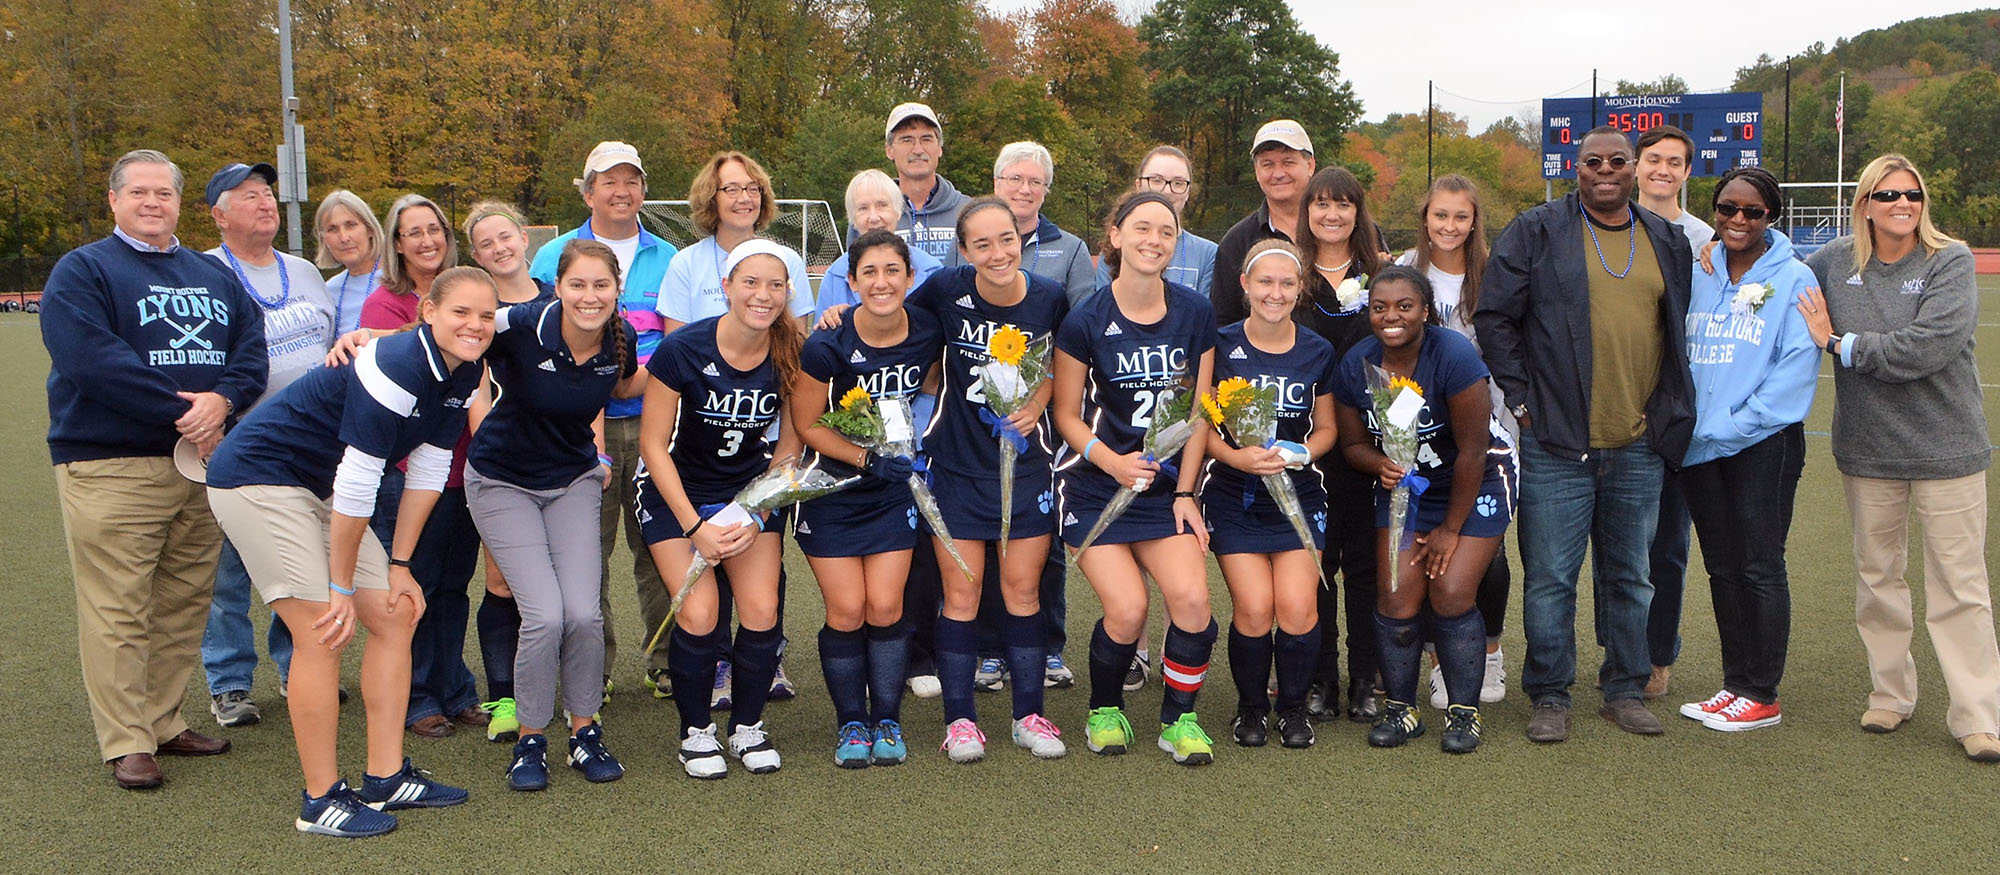 Photo of the Lyons field hockey team's six seniors and their families during a pre-game ceremony on October 14, 2017 against Wheaton.